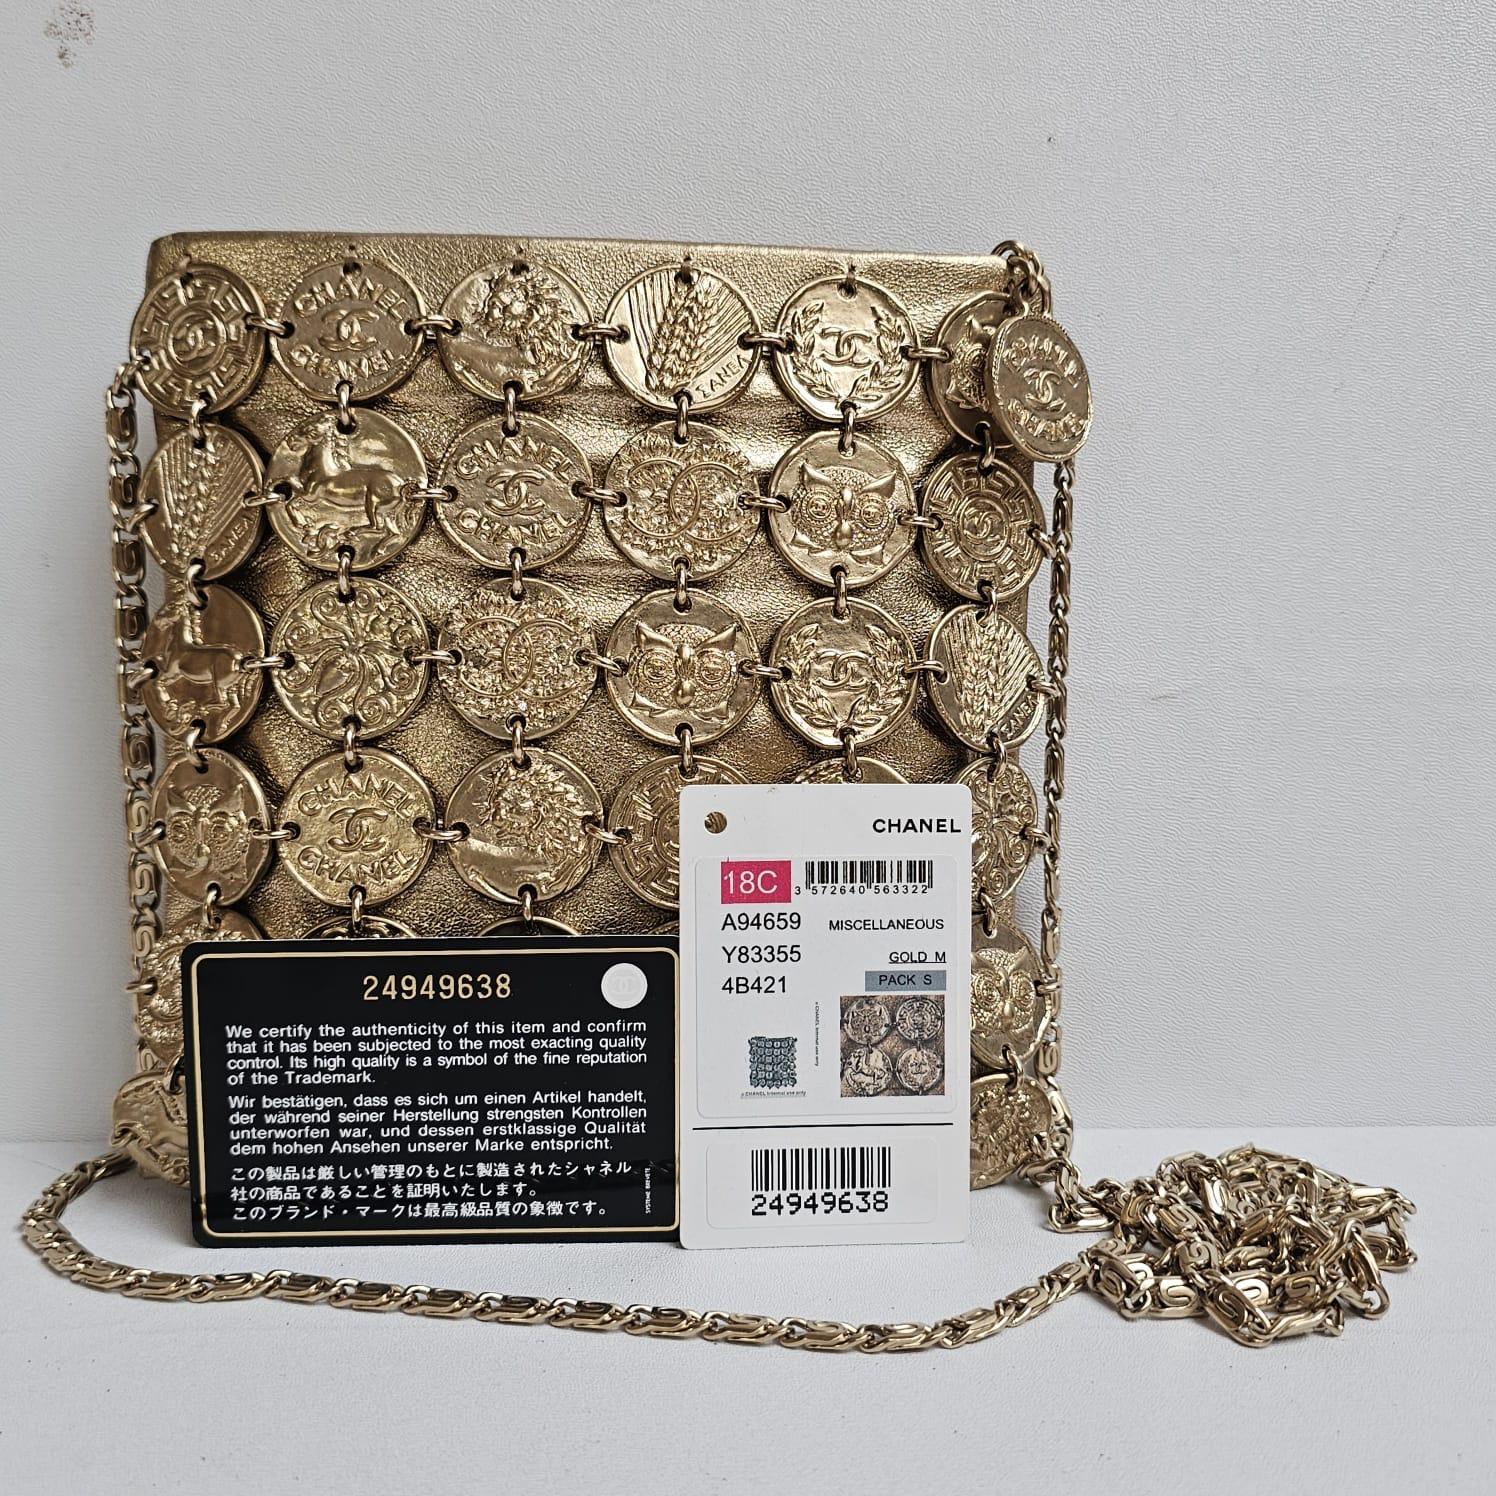 Rare Chanel Cruise 2018 Metier D’Art Gold Medallion Chain Bag For Sale 9